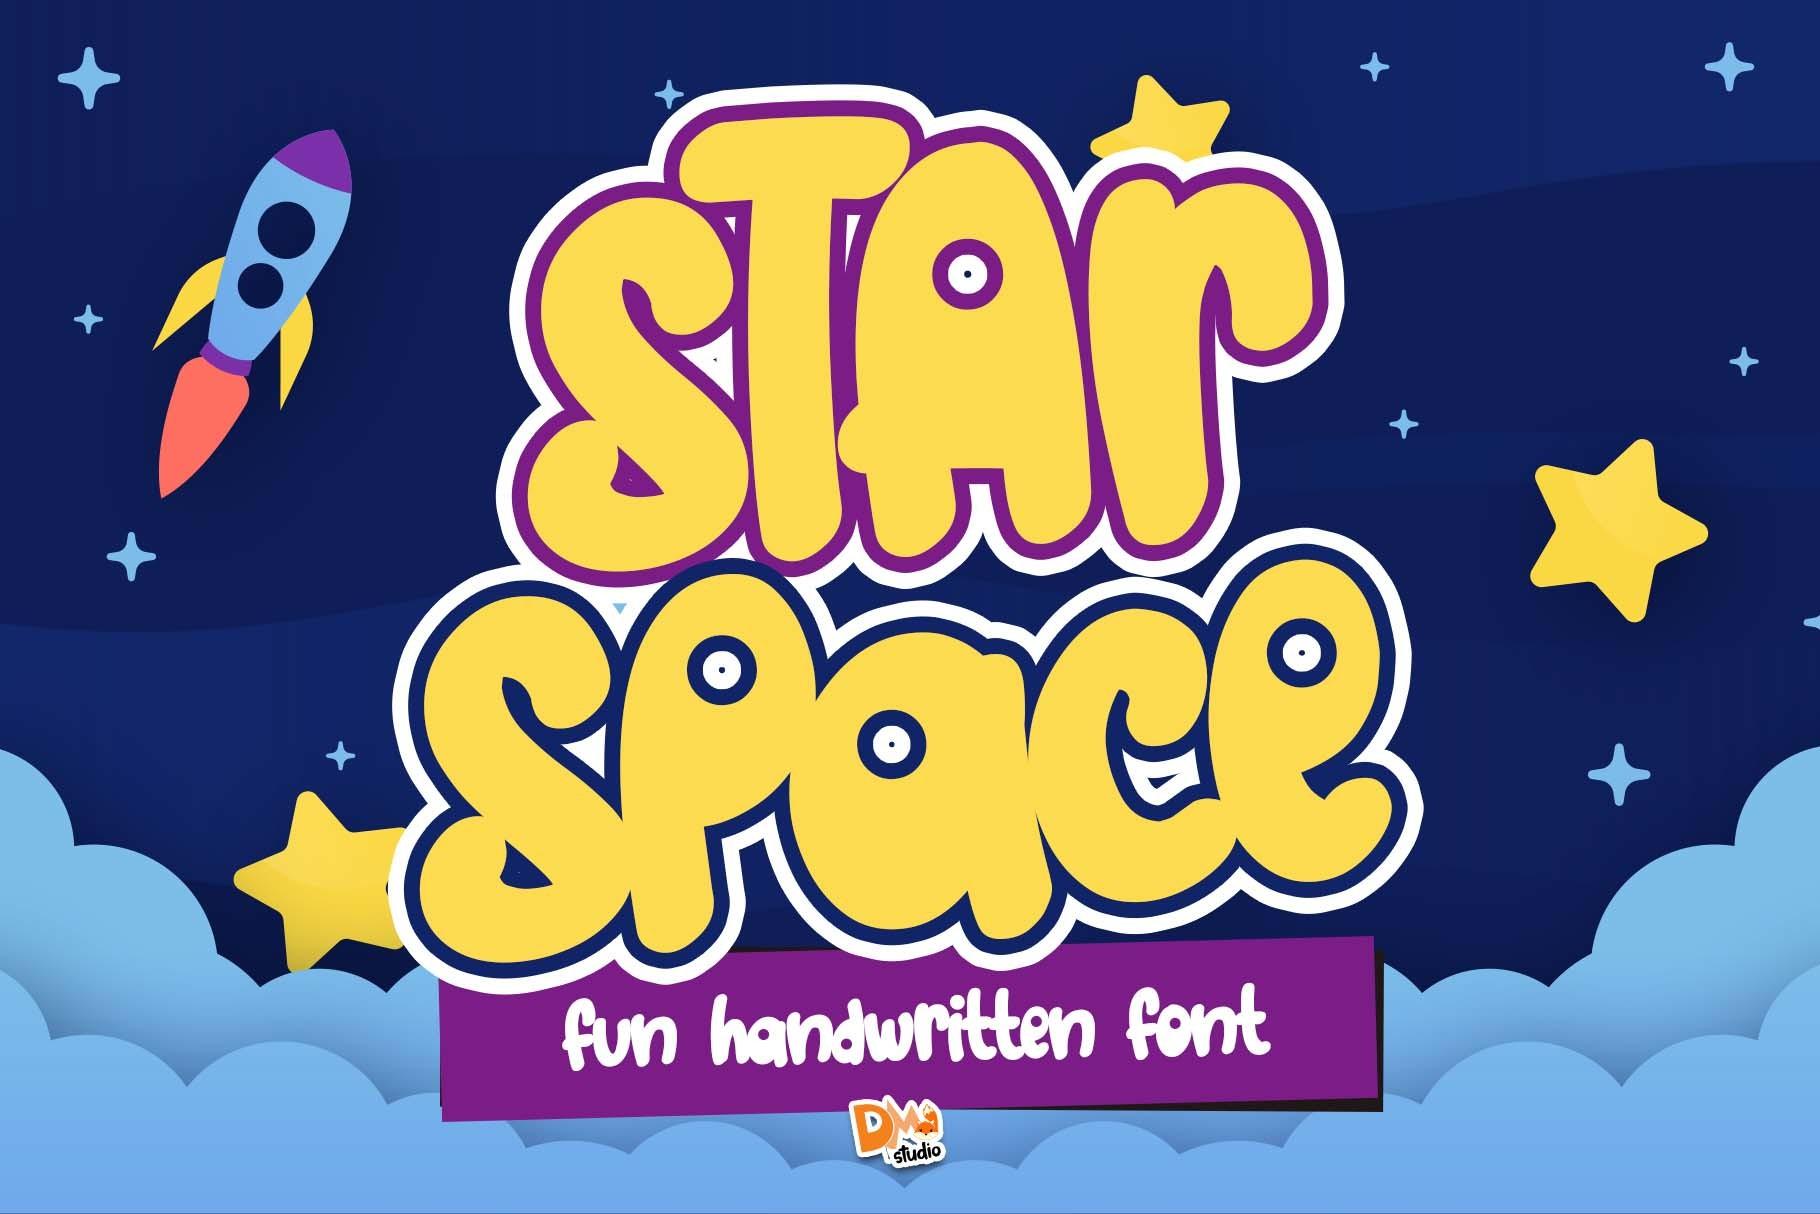 Star Space Font